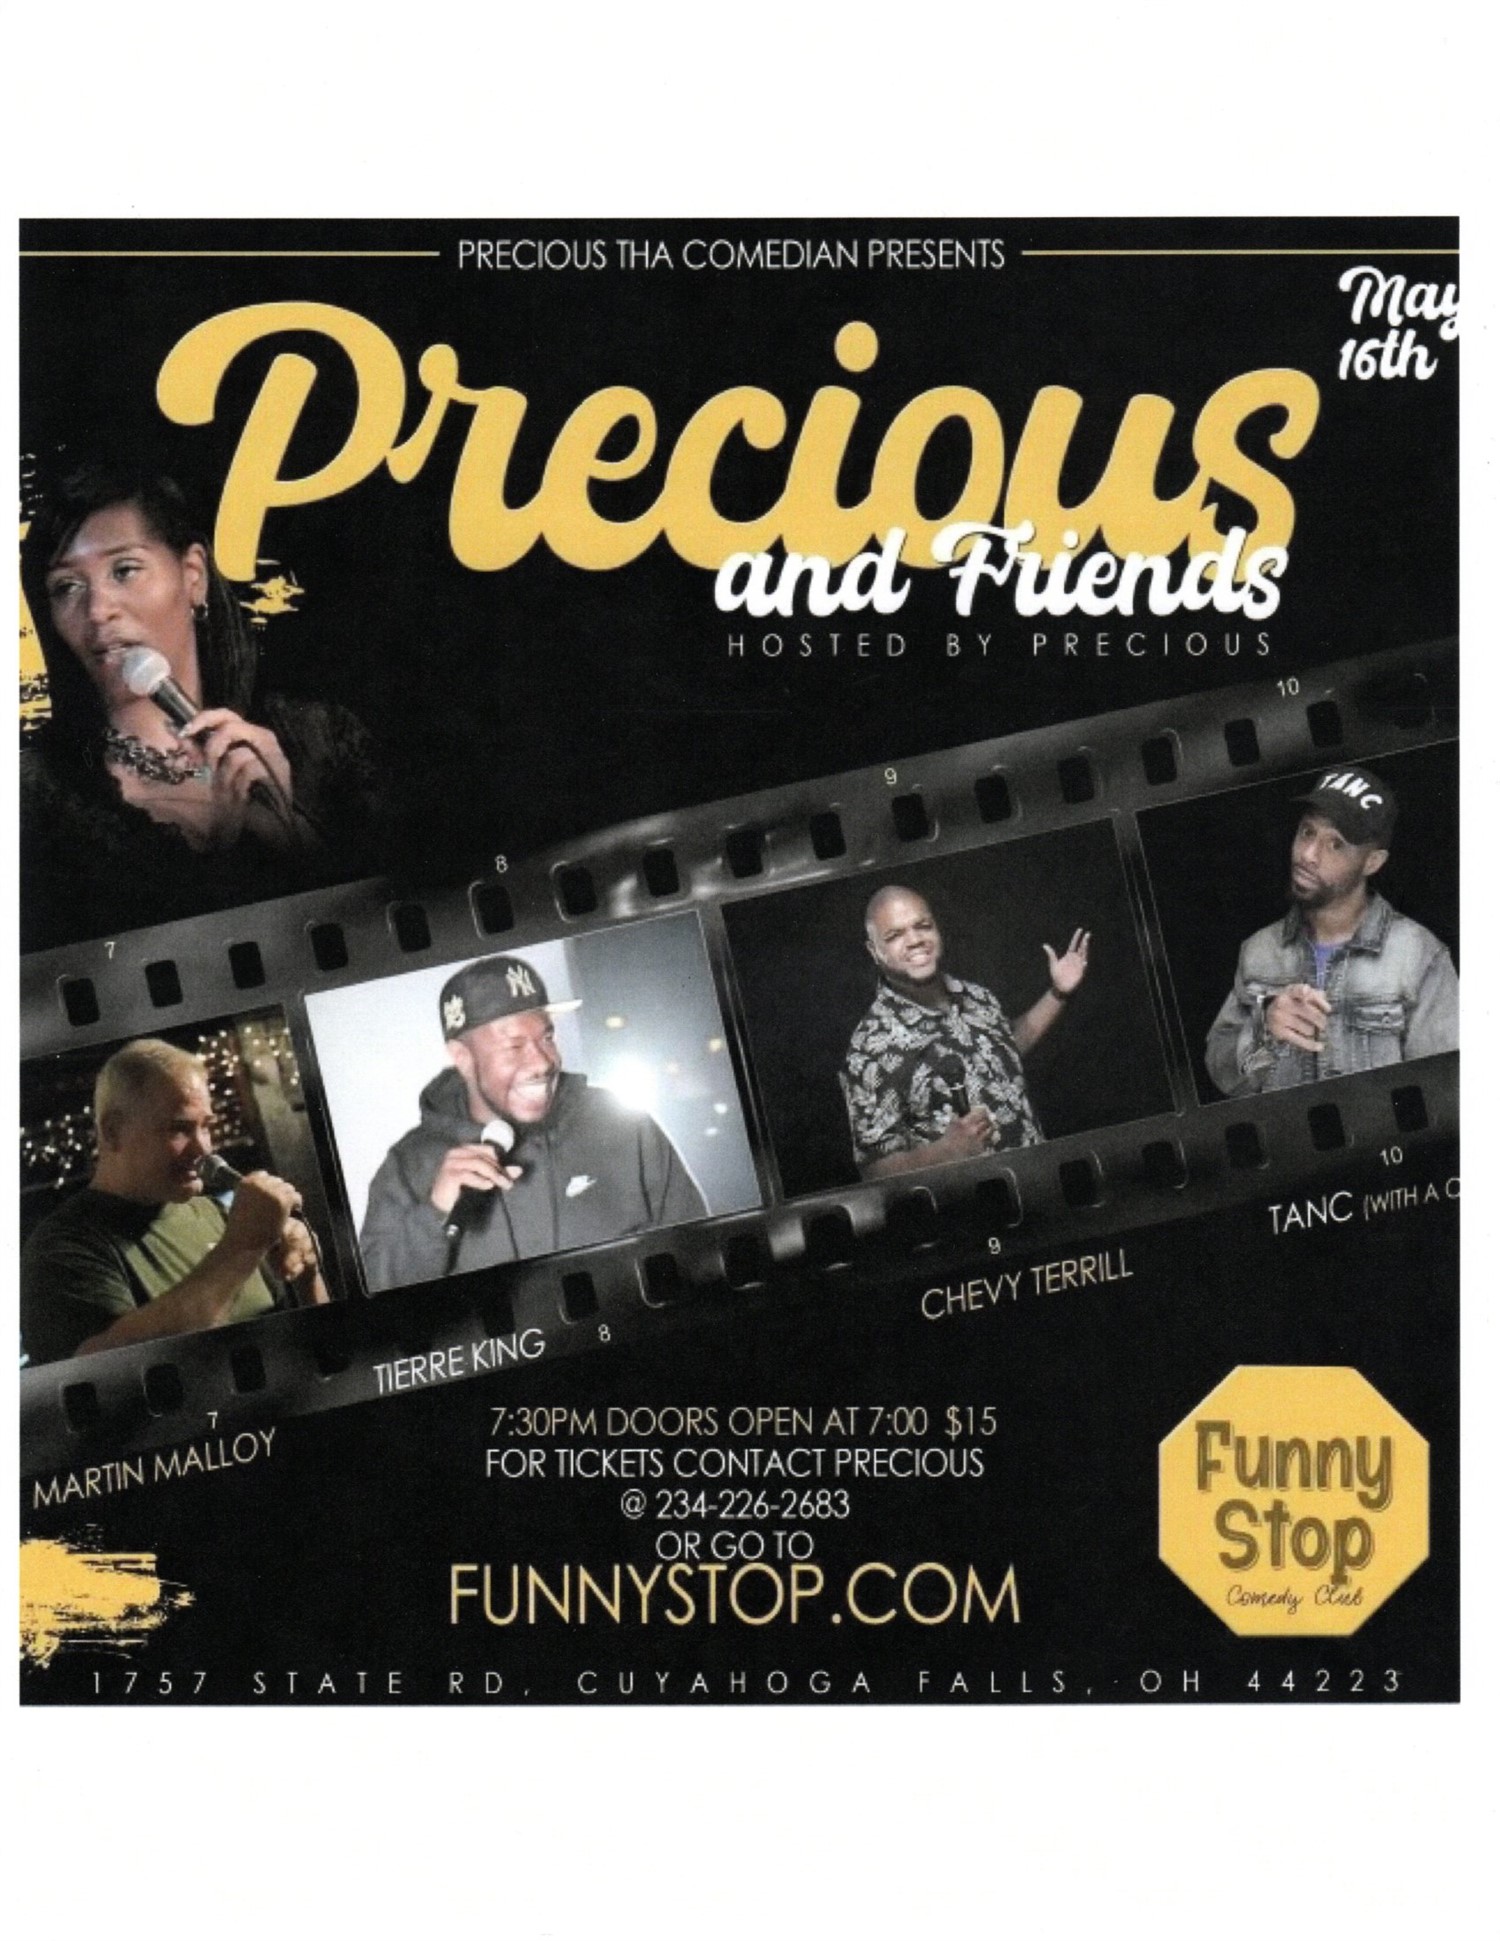 Precious & Friends Funny Stop Comedy Club on May 16, 20:00@Funny Stop Comedy Club - Buy tickets and Get information on Funny Stop funnystop.online